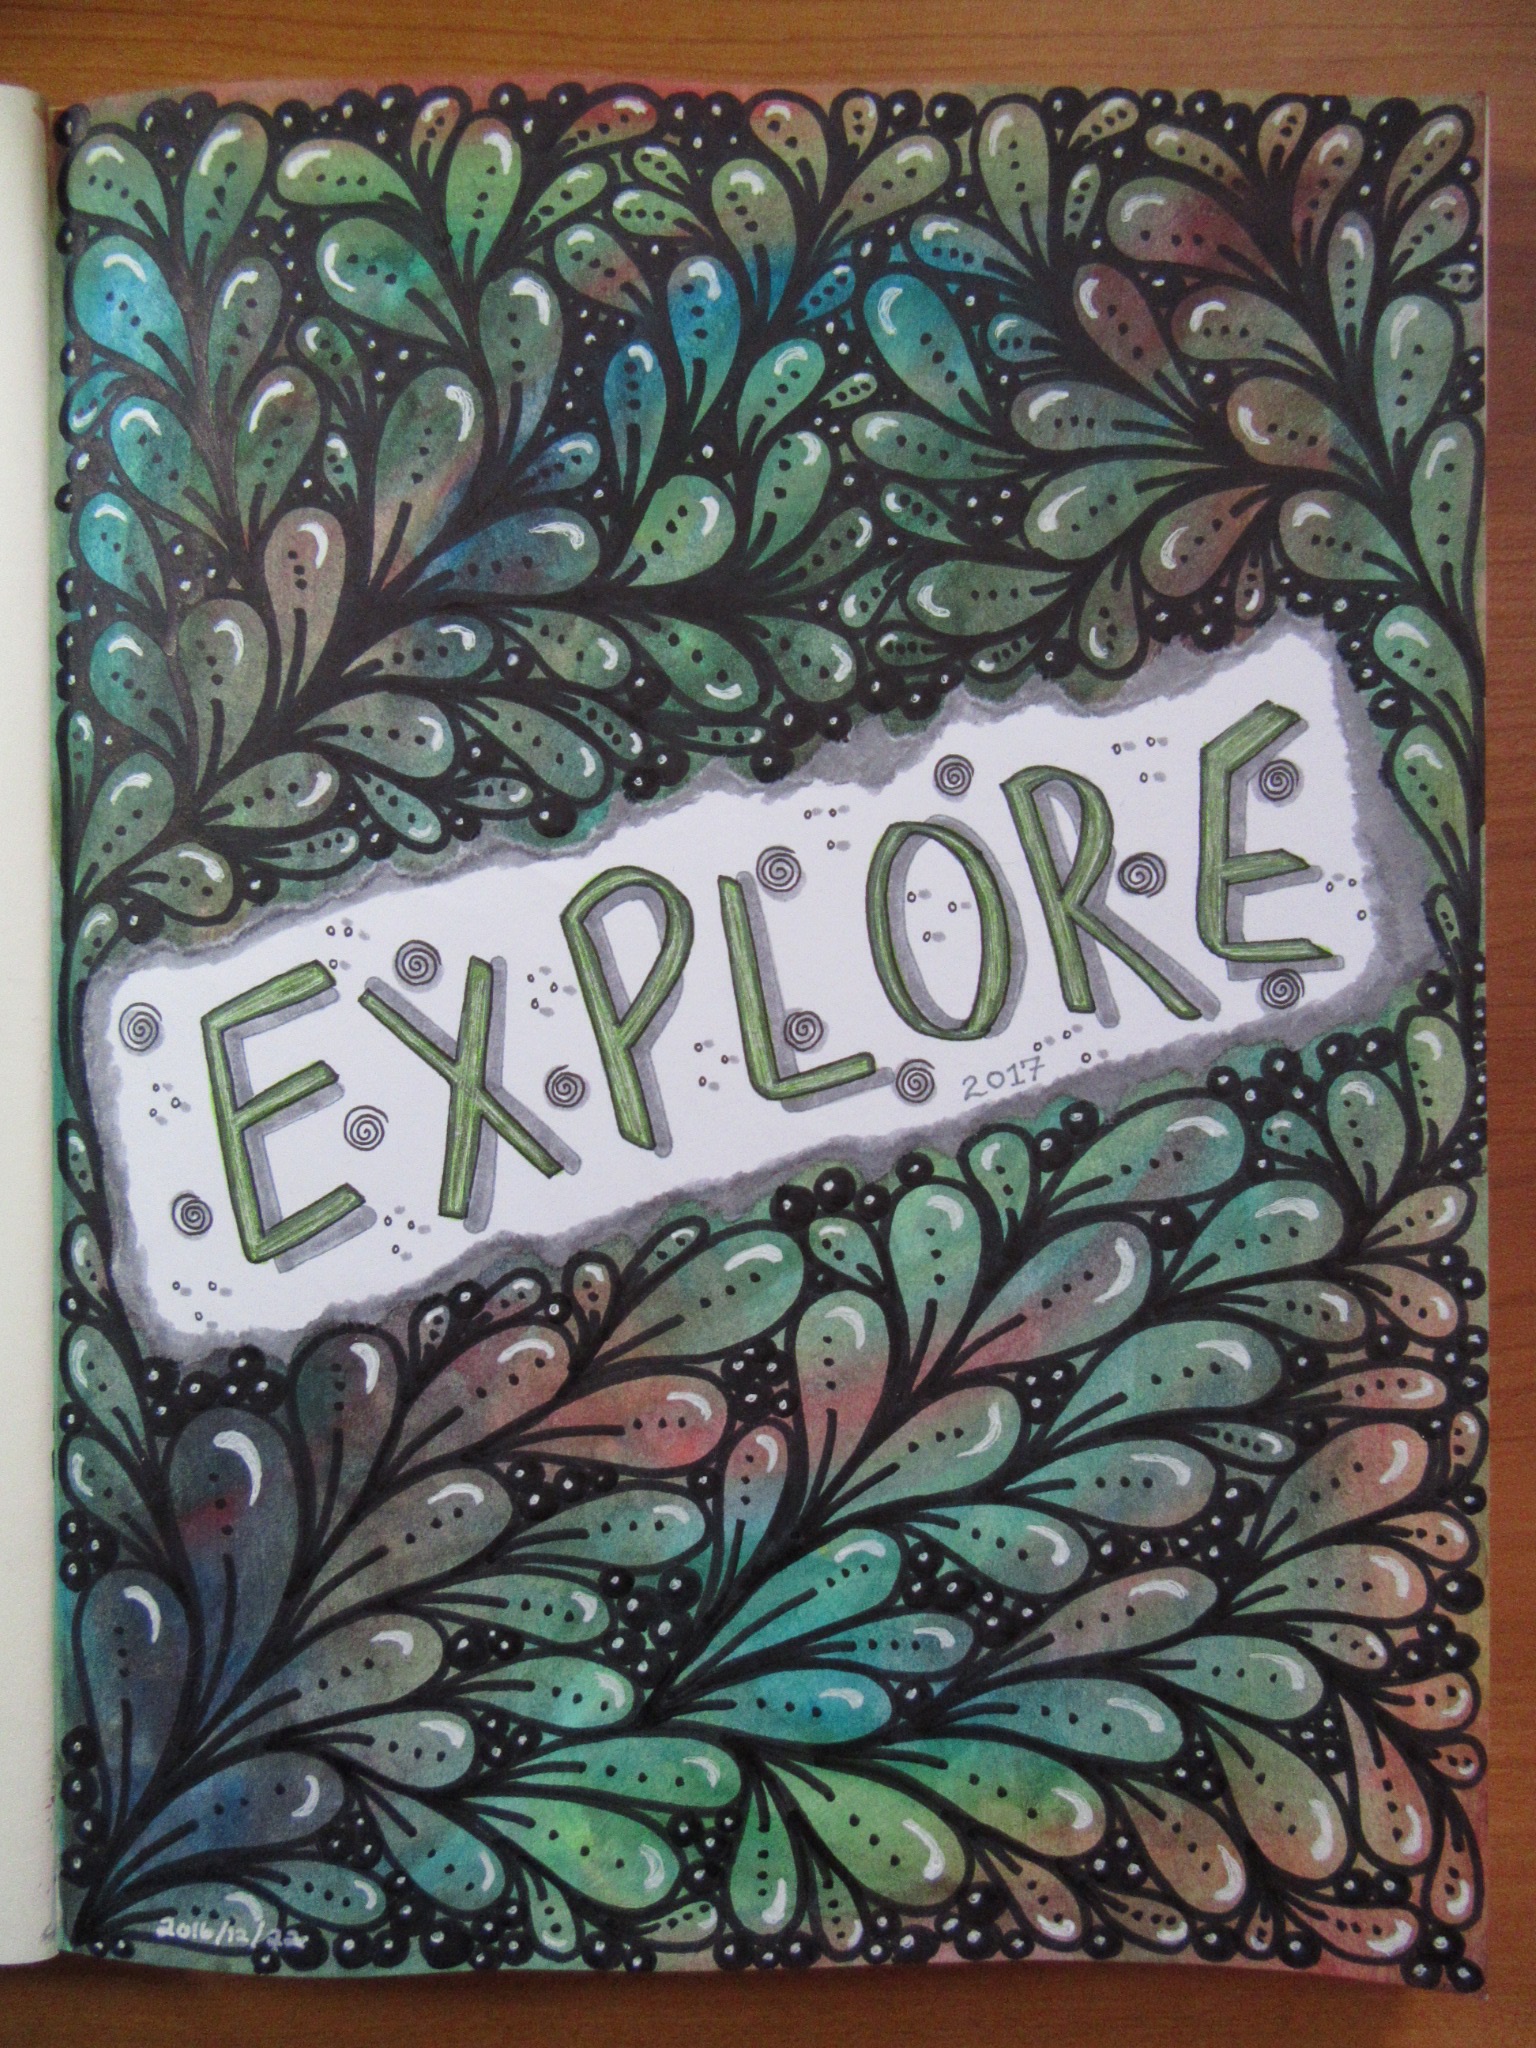 My 2017 Word of the Year - Explore